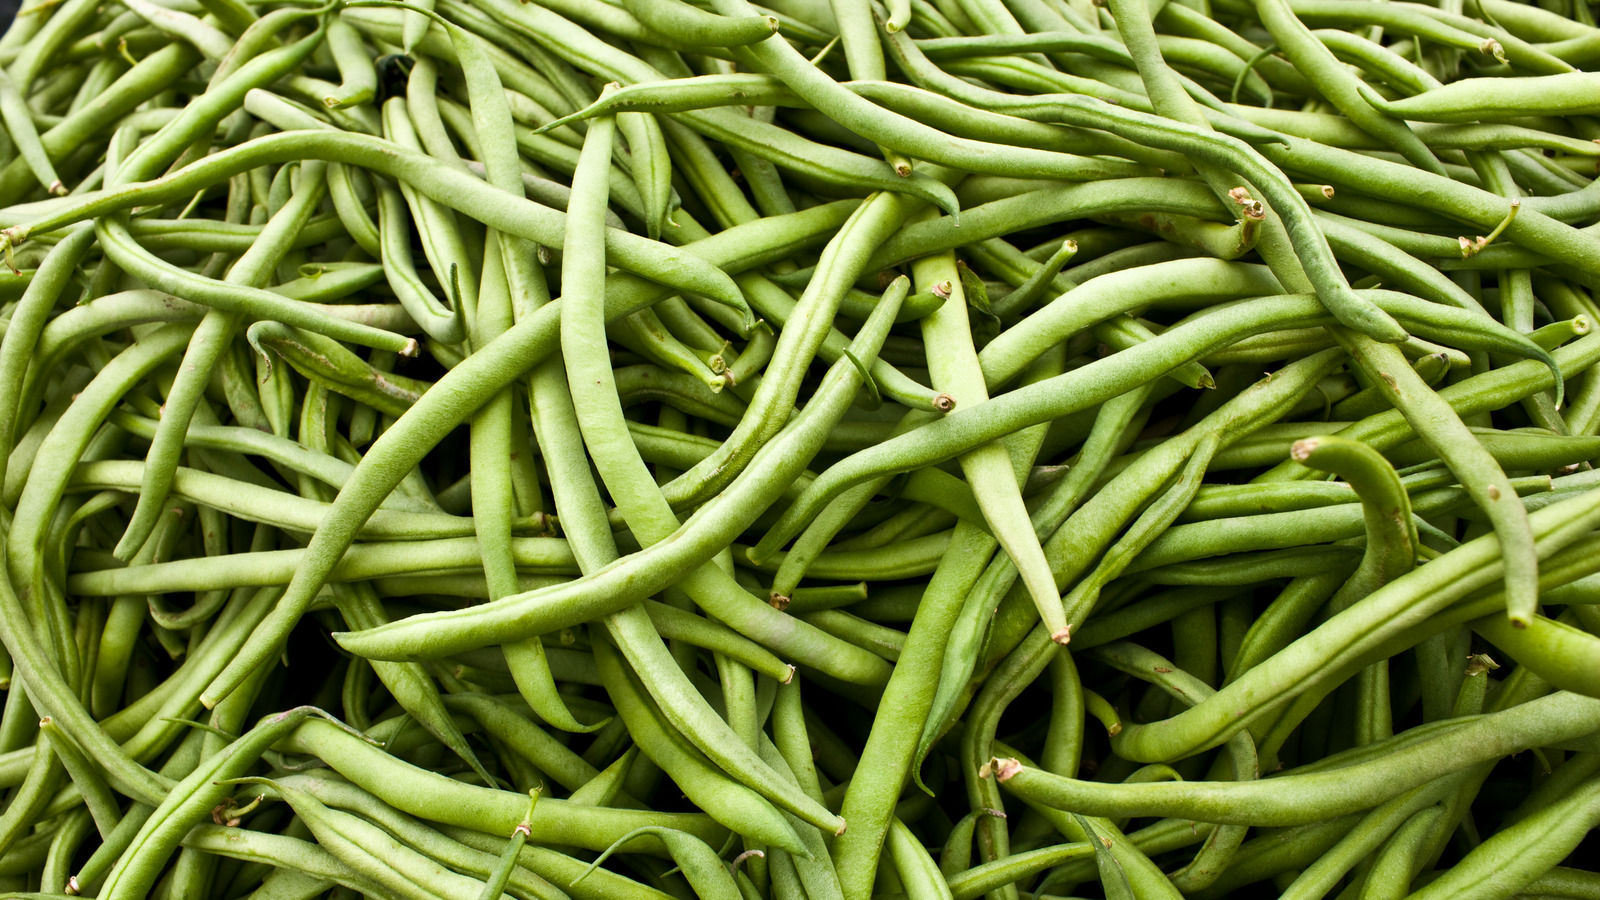 What's the Difference Between Haricot Verts and Green Beans?